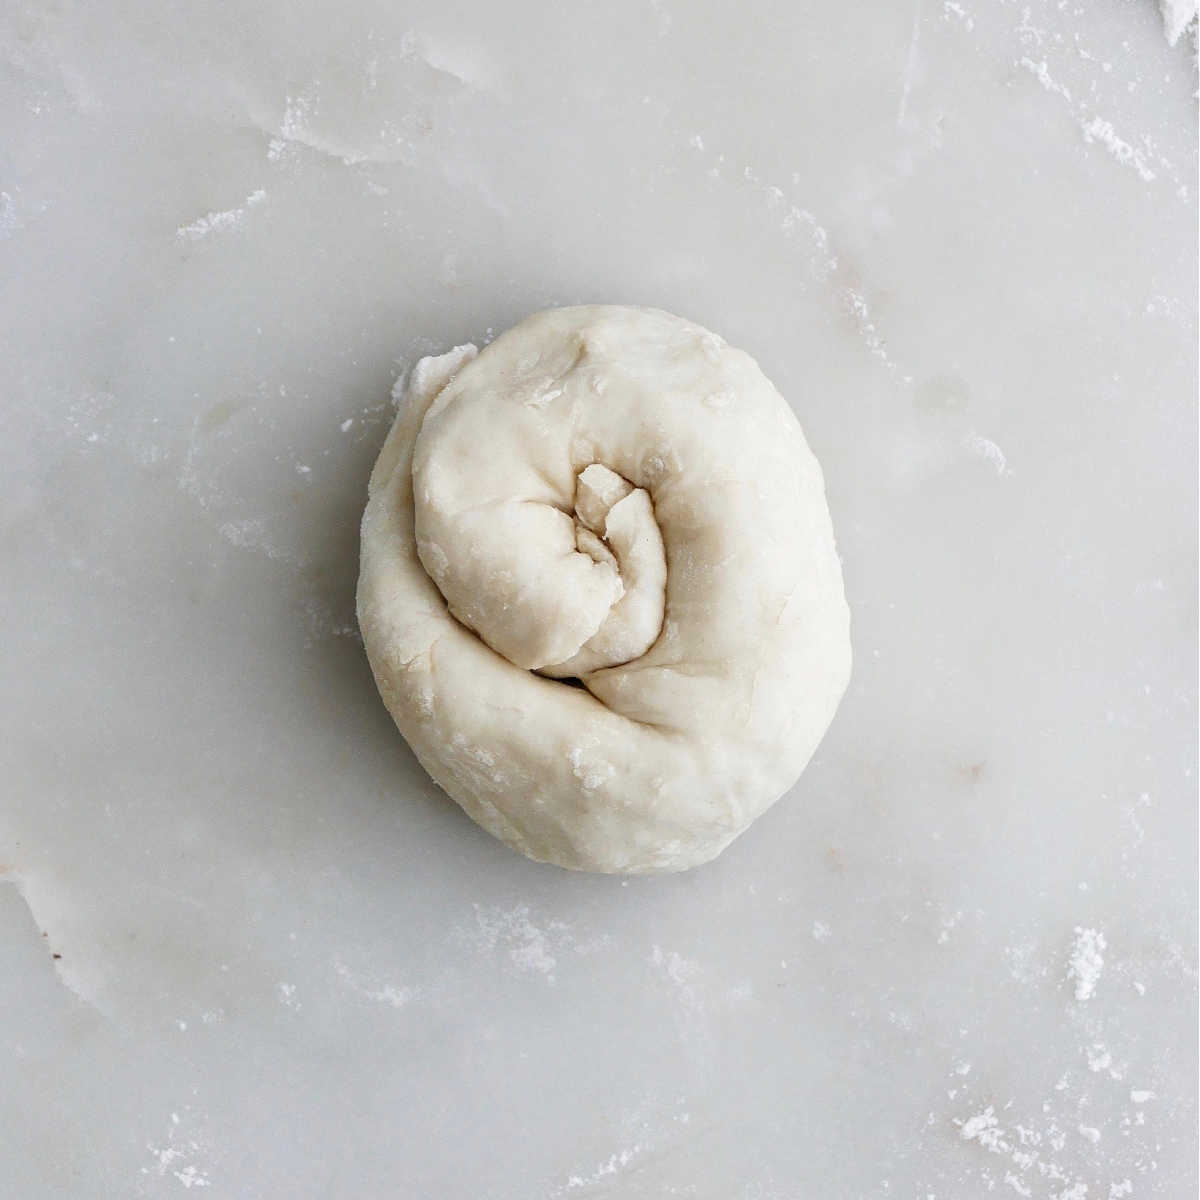 dough for leek pancakes rolled up into a spiral on a floured surface